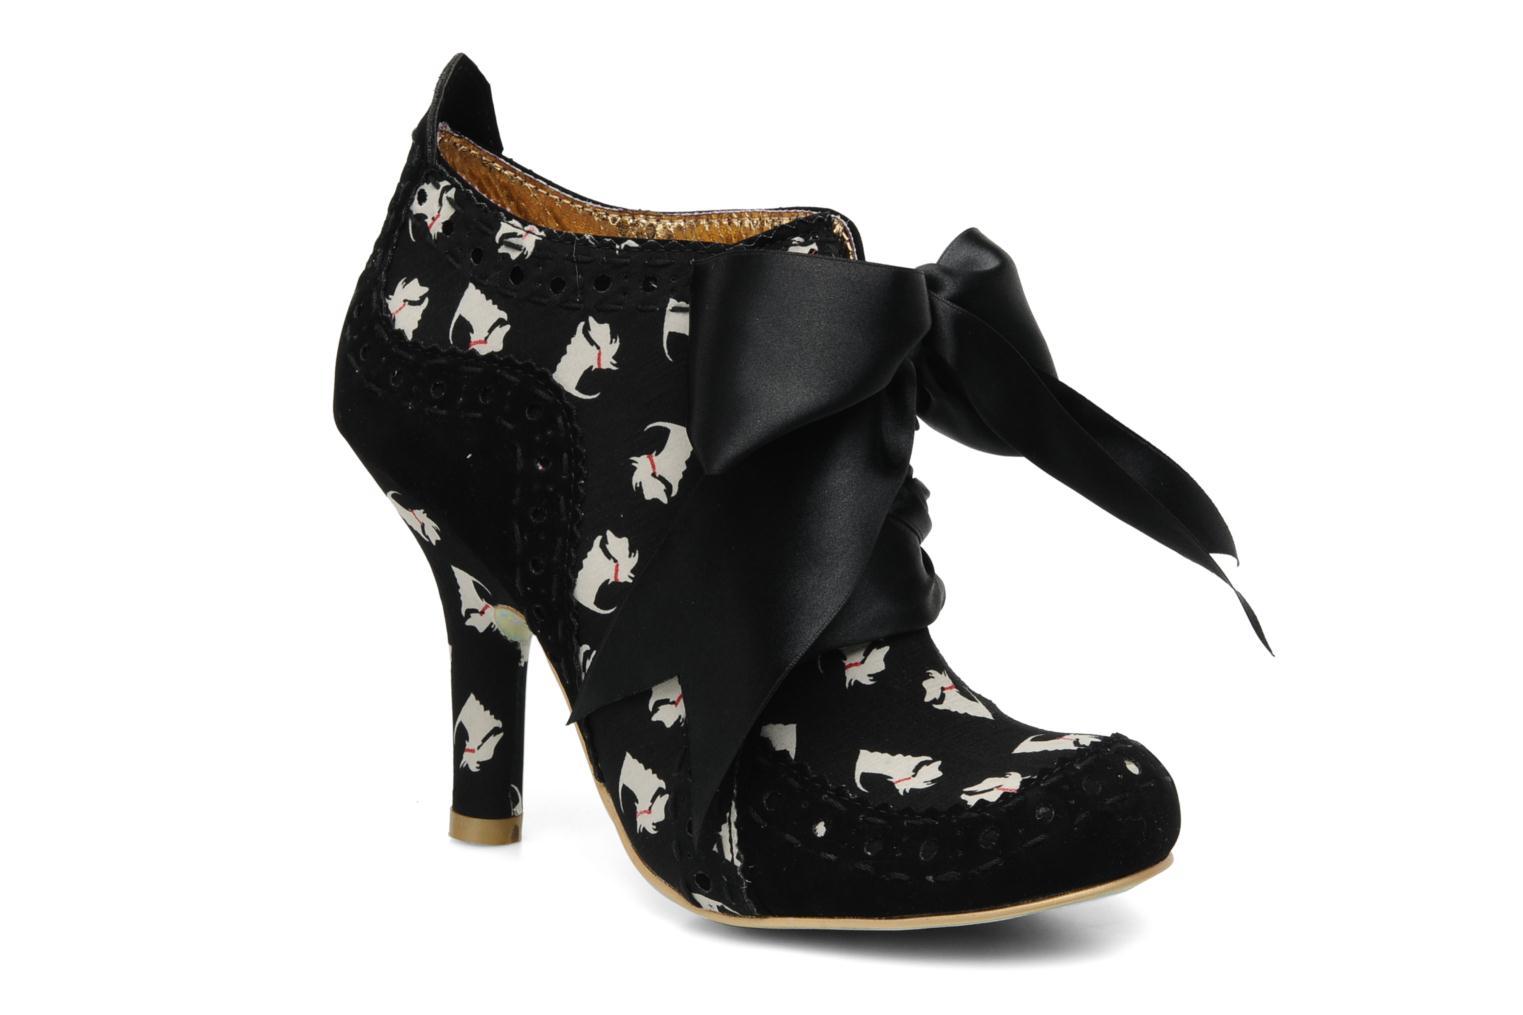 Foto Boots y Botines Irregular Choice Abigails party Mujer foto 316470